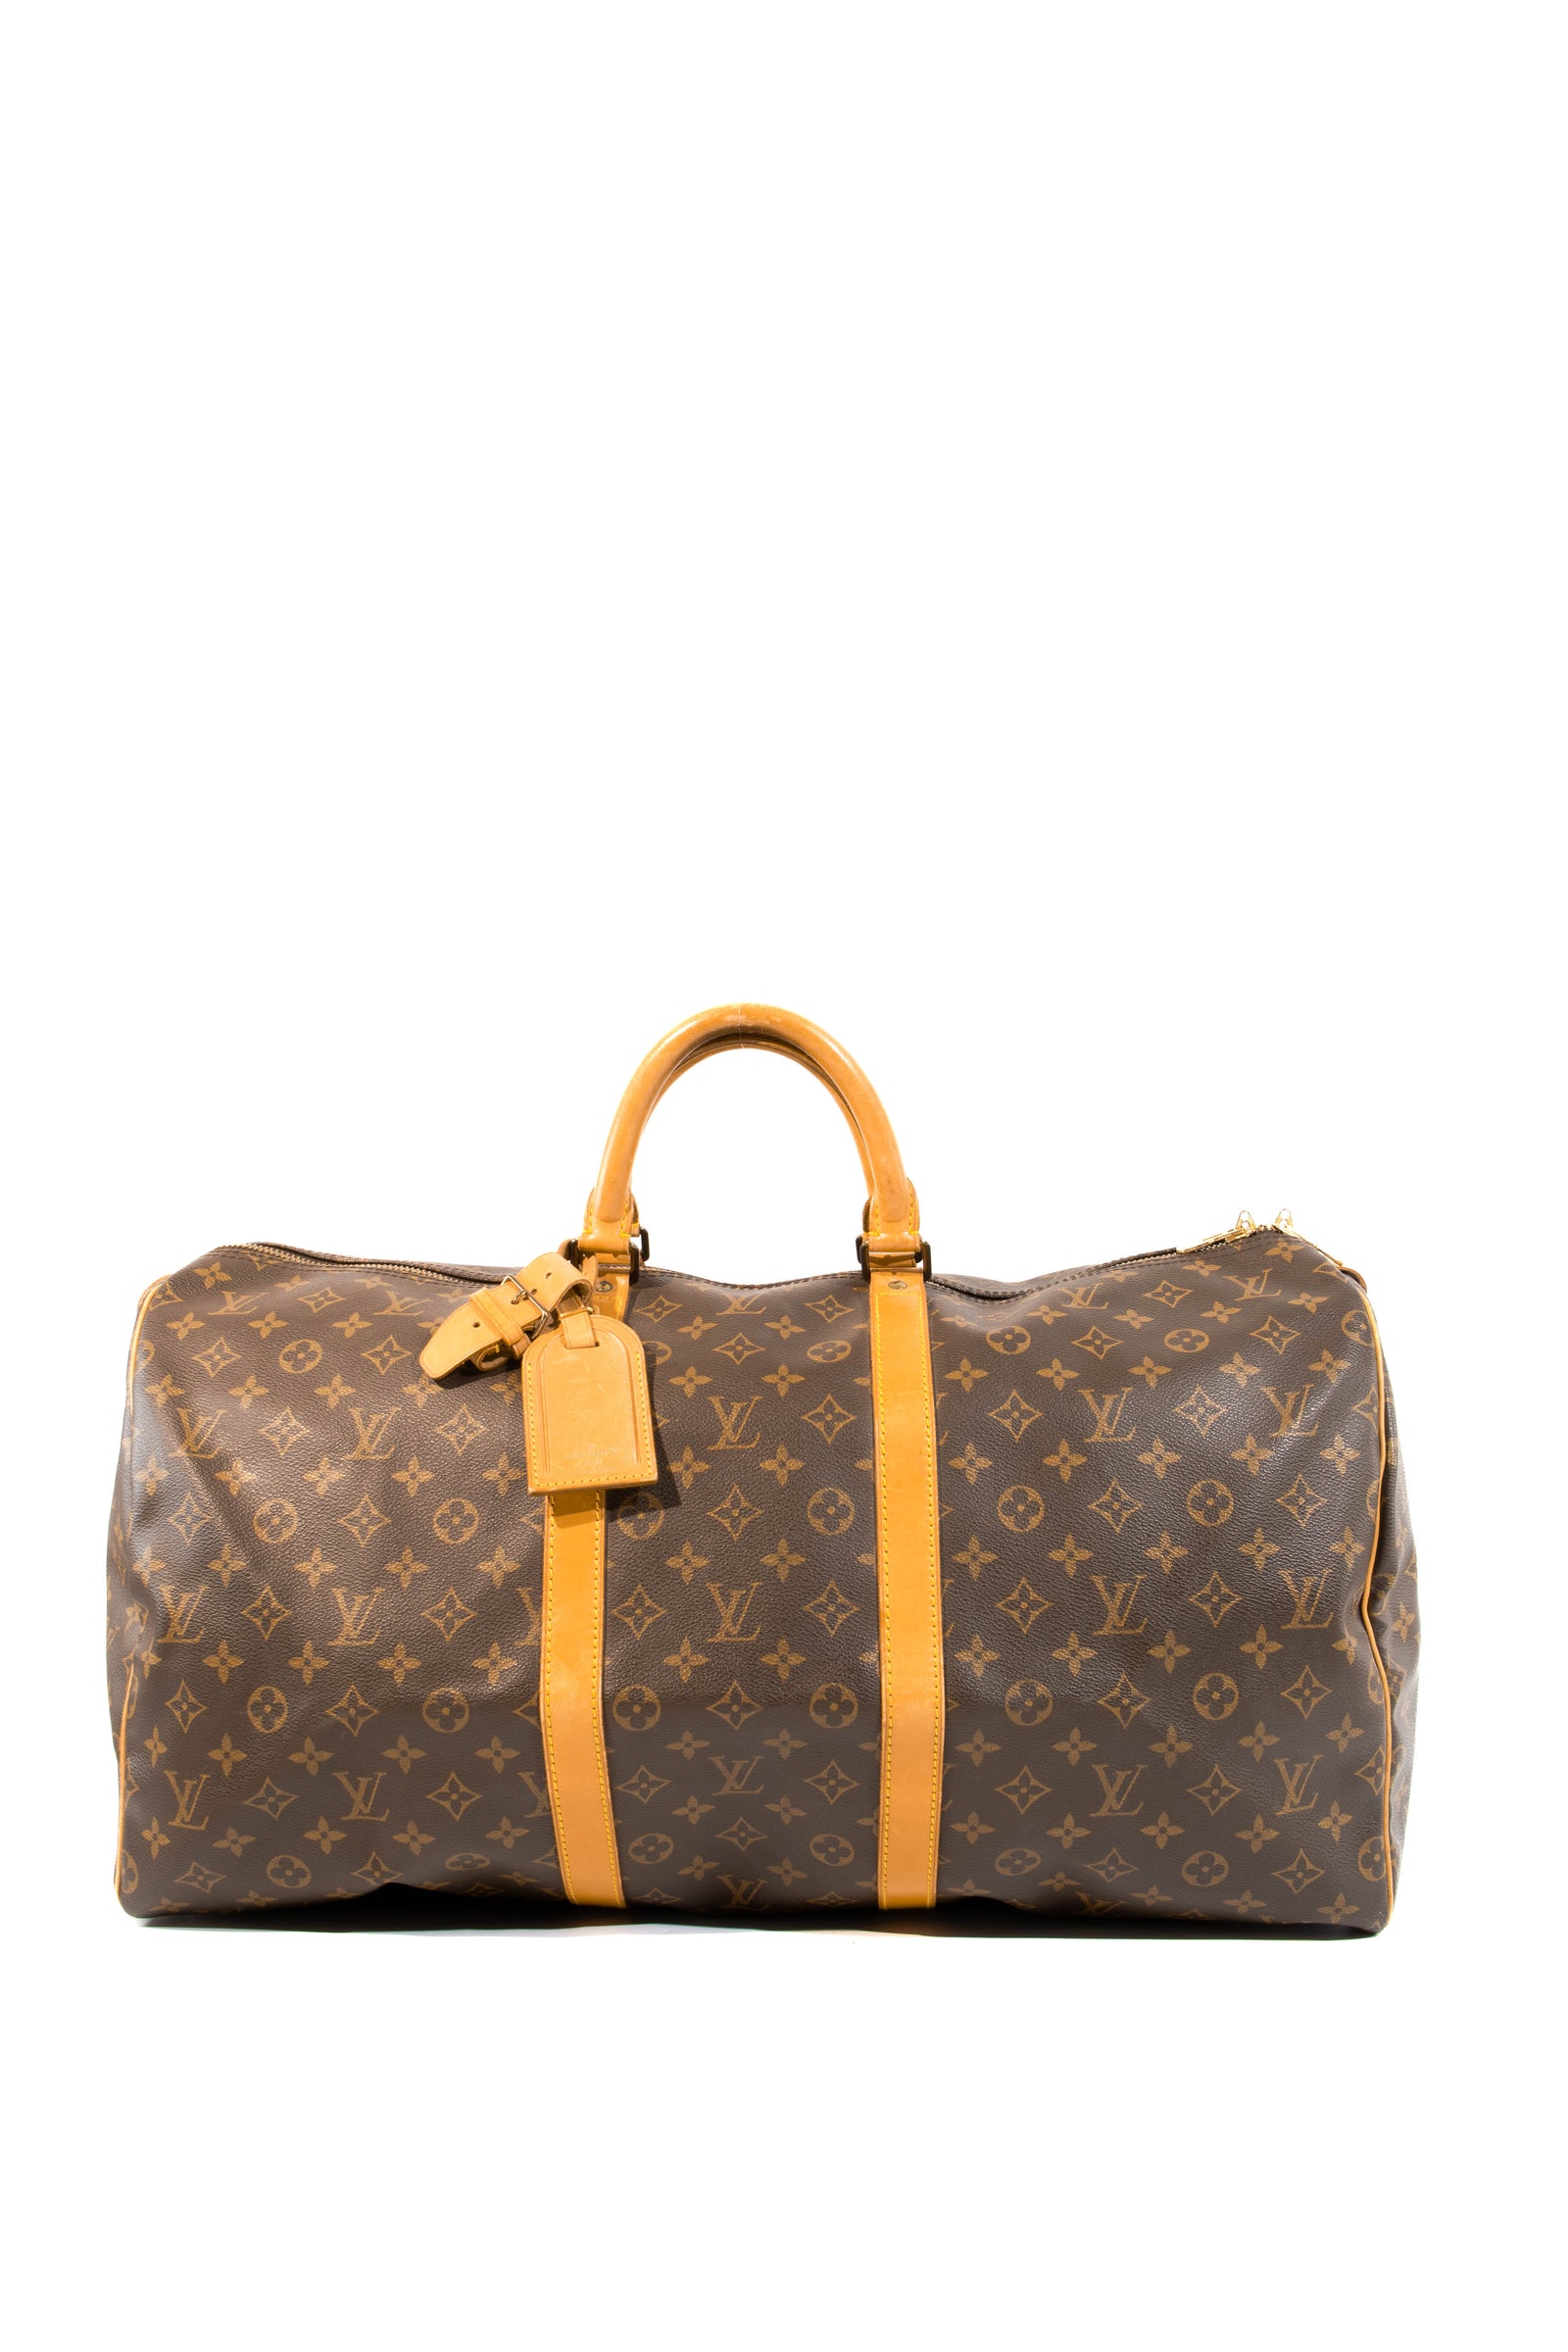 Louis Vuitton Large Monogram Duffel Bag Overnight Travel Keepall Rare  French Co